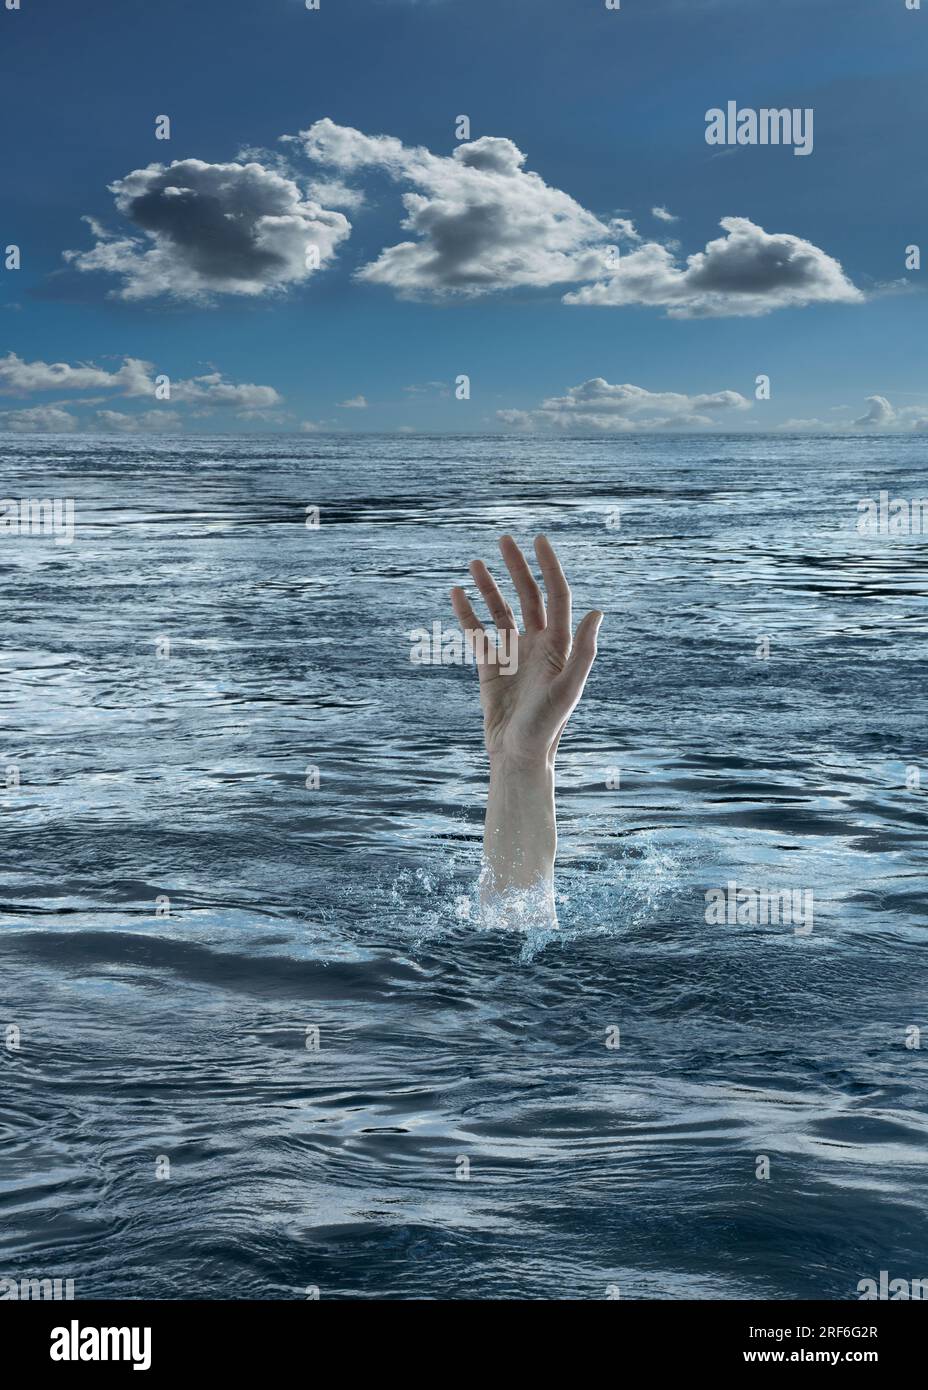 Reaching out hand in drowning emergency concept Stock Photo